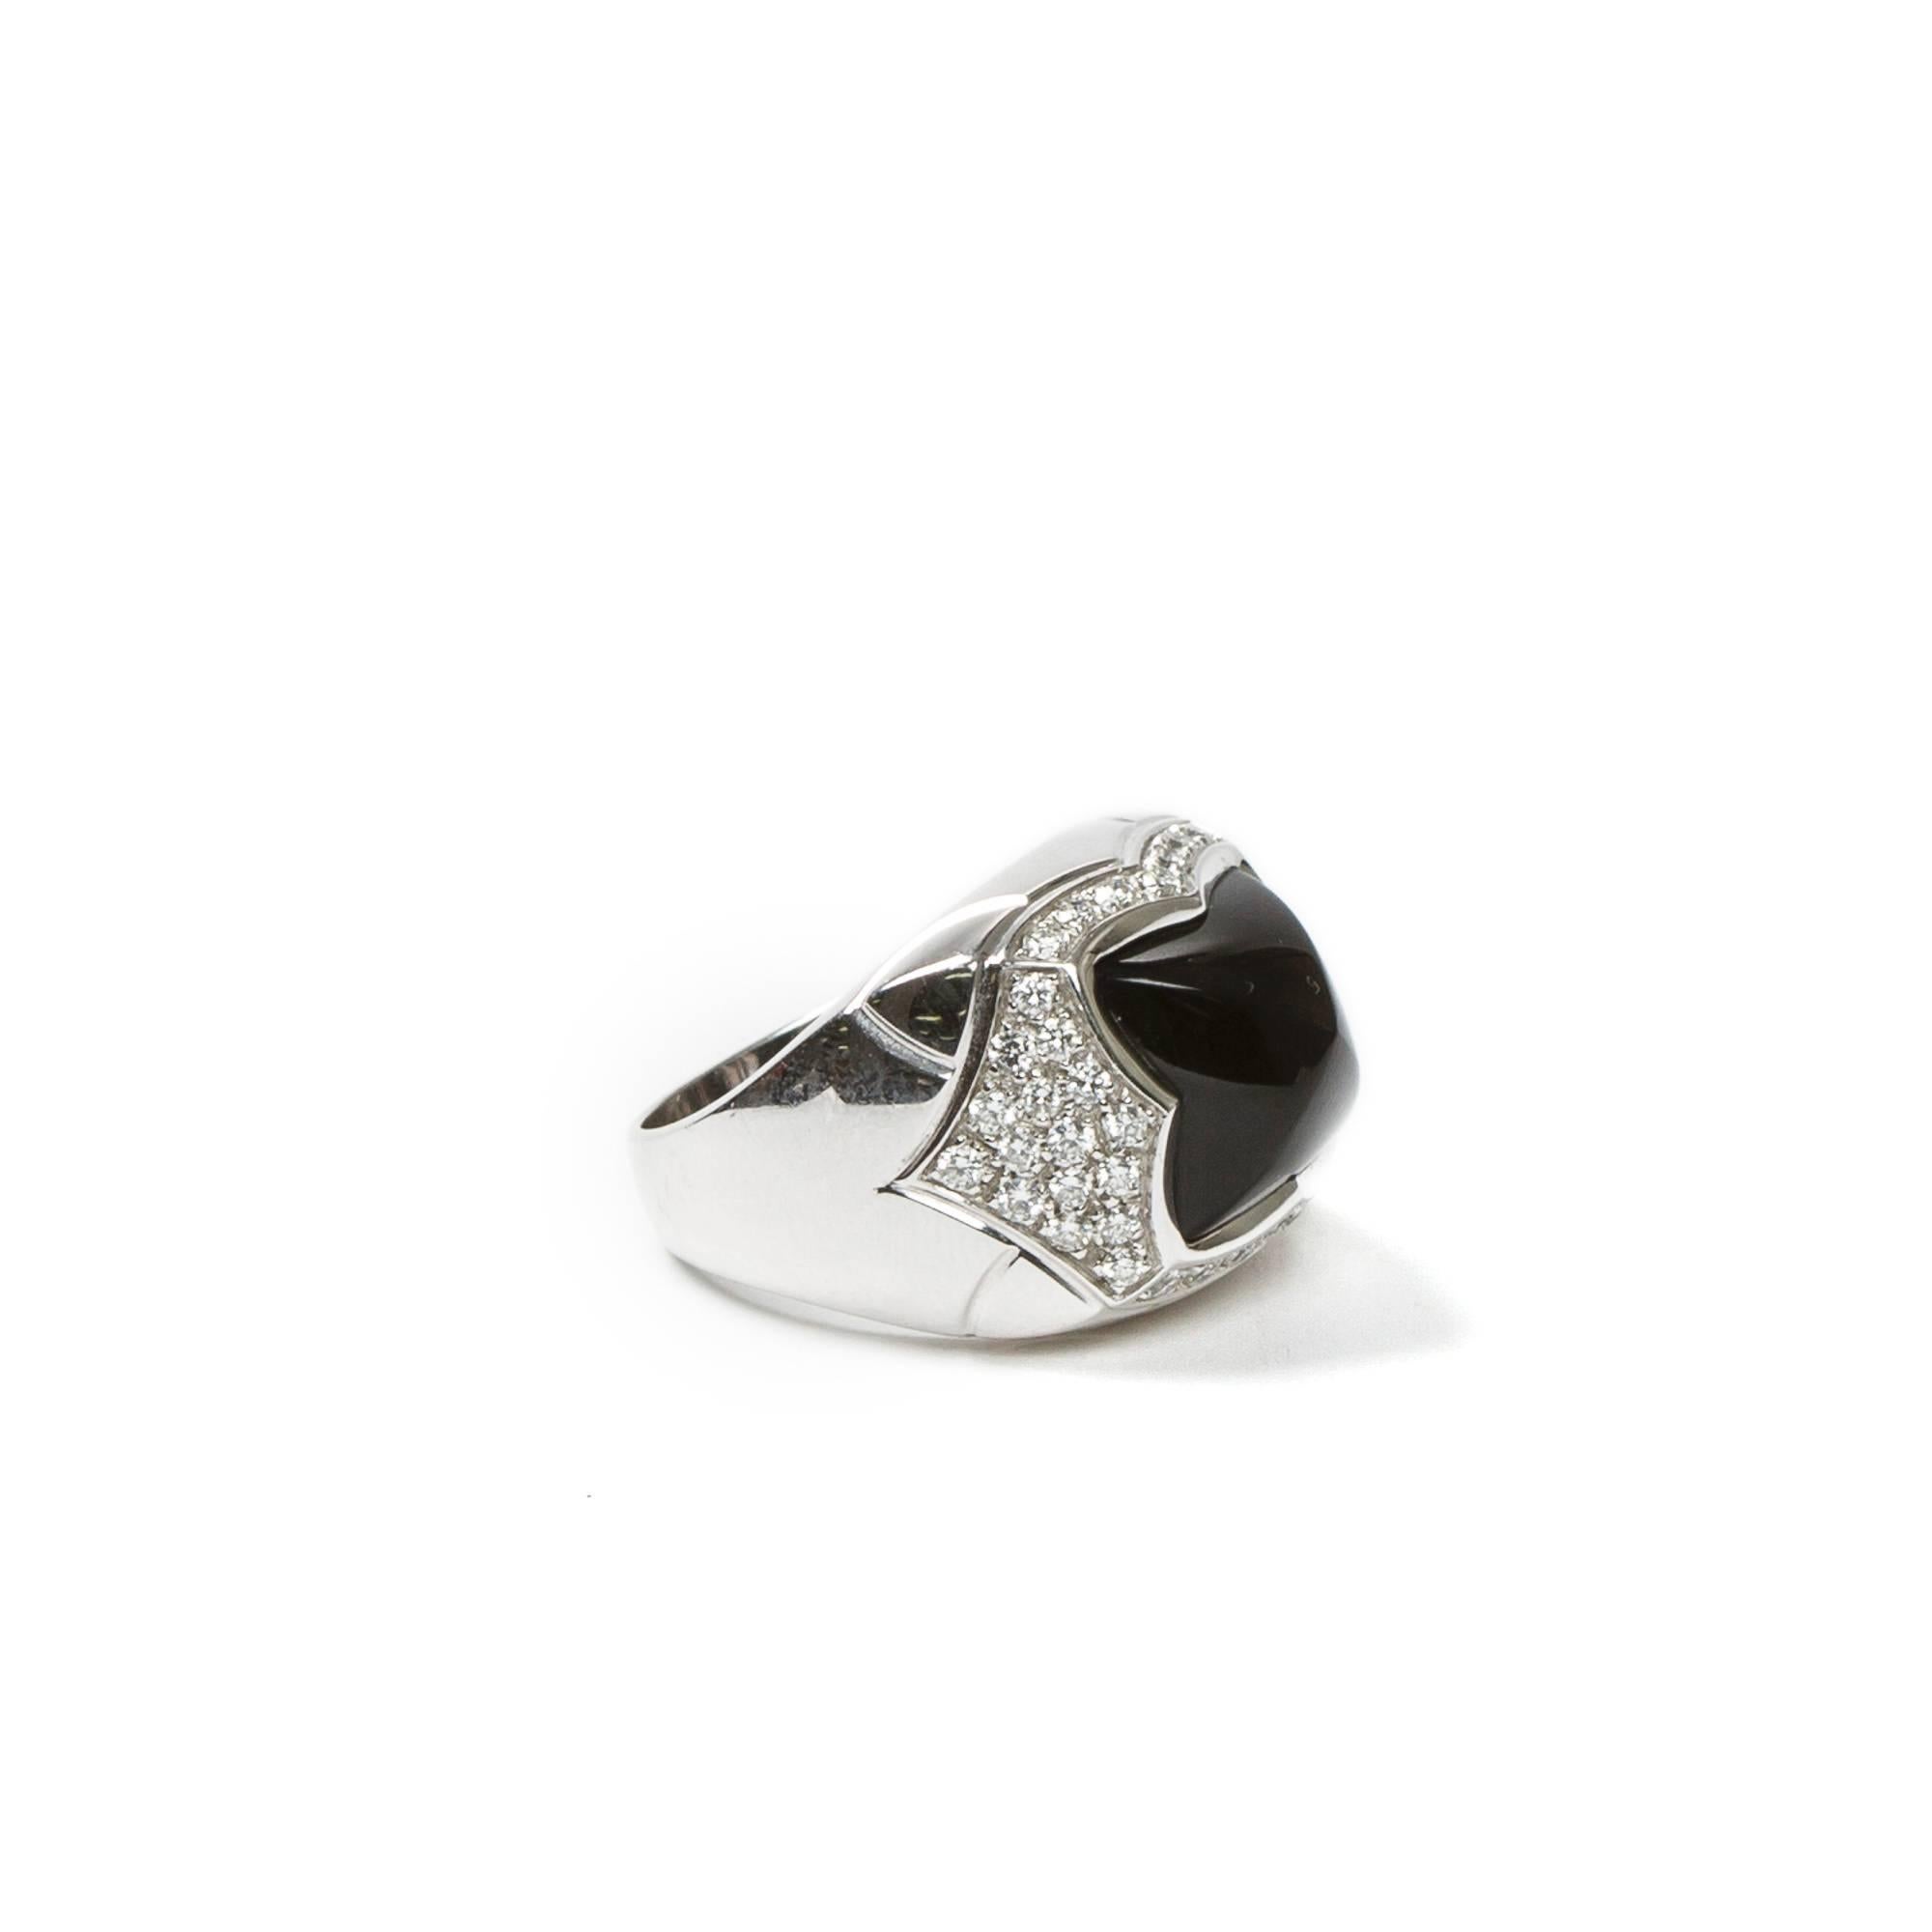 Pyramid ring in 750 white gold with paved diamonds and a black onyx. Hallmarks inside the ring 